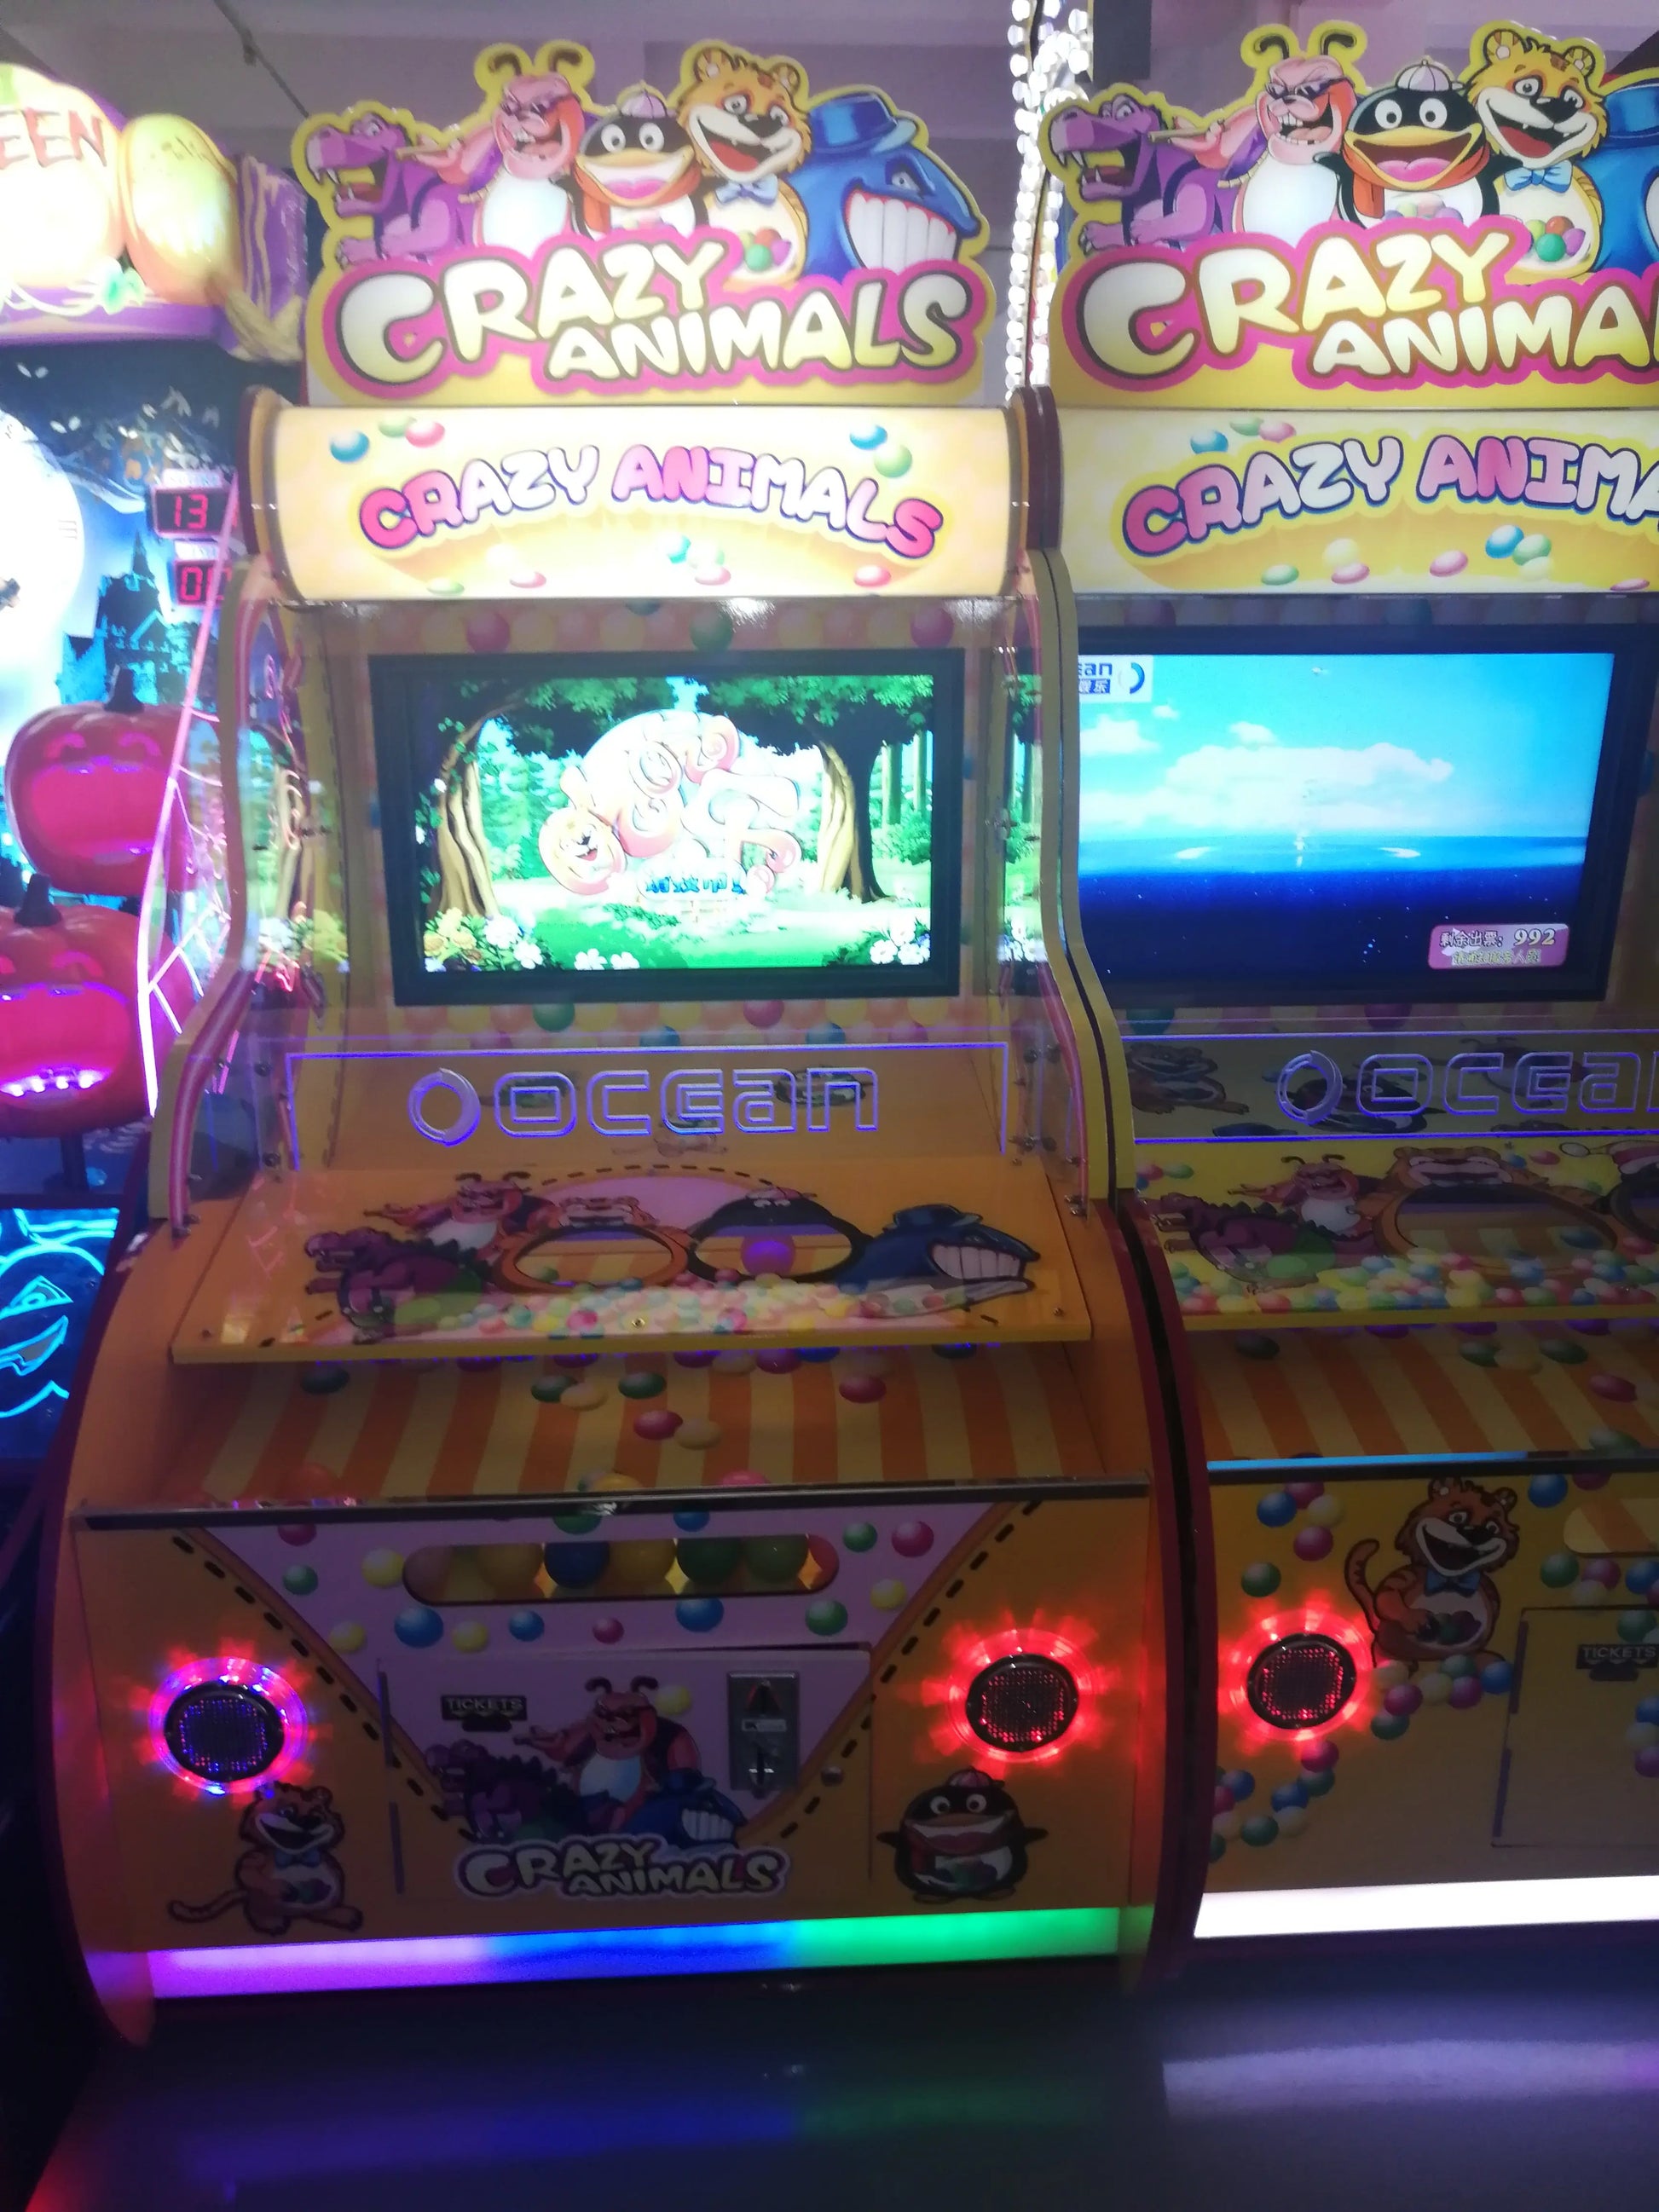 Crazy-Animals-Lottery-Redemption-game-machine-Amusement-Coin-Operated-Ticket-Redemption-Electronic-Video-Arcade-games-for-kids-Tomy-Arcade